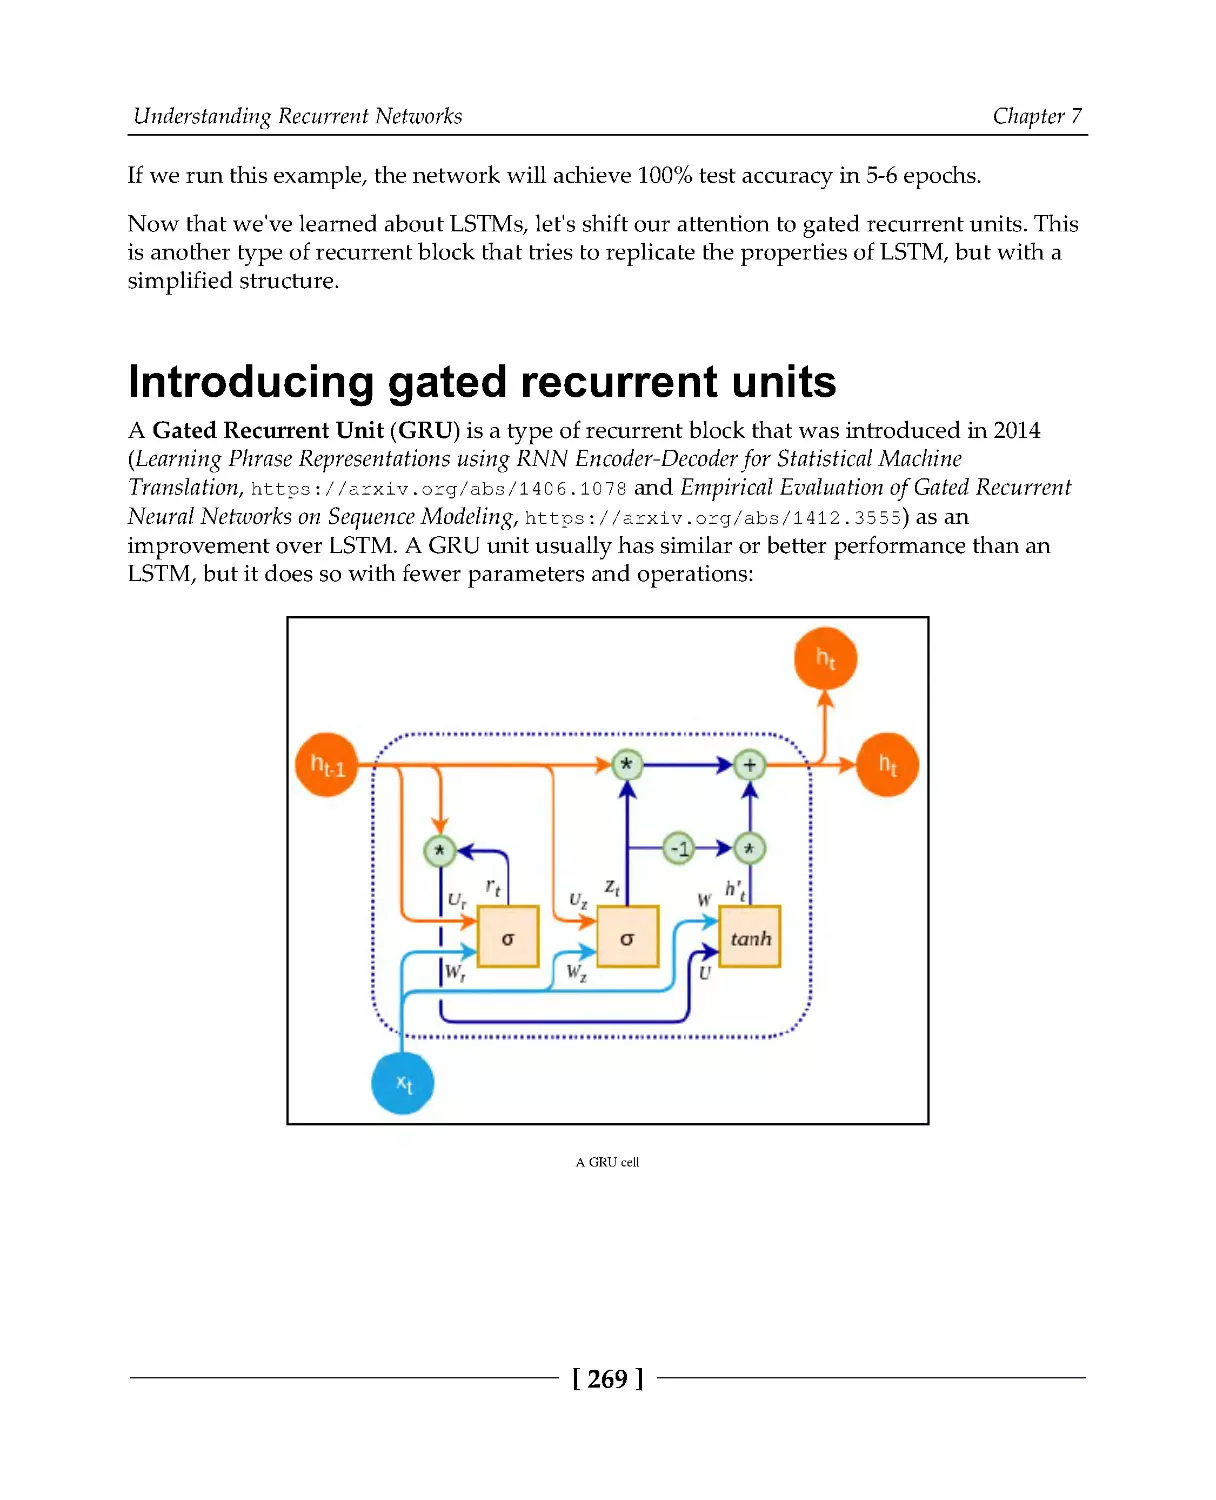 Introducing gated recurrent units